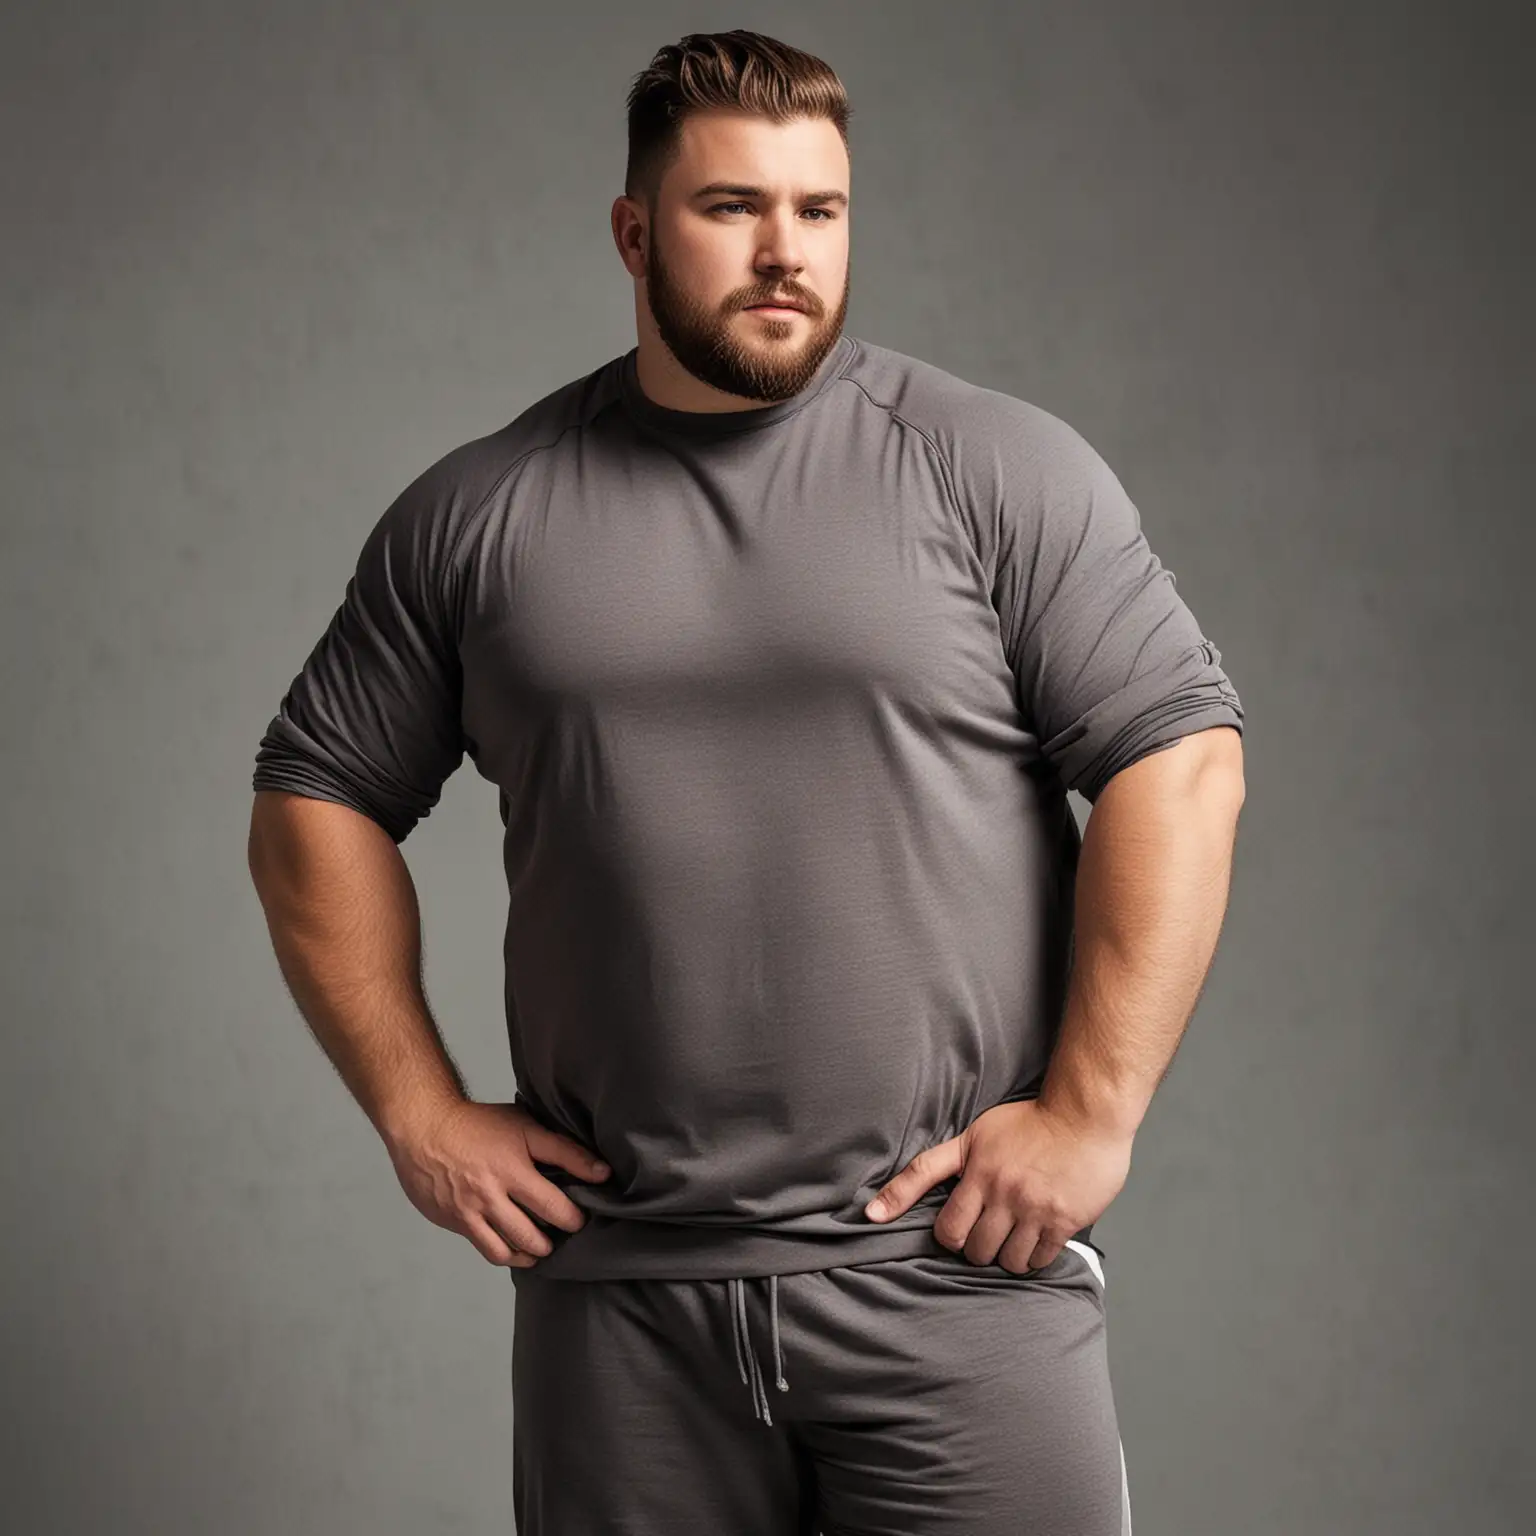 image of a very bulky man wearing sportswear, which I can use to display plus size men's clothing in my store